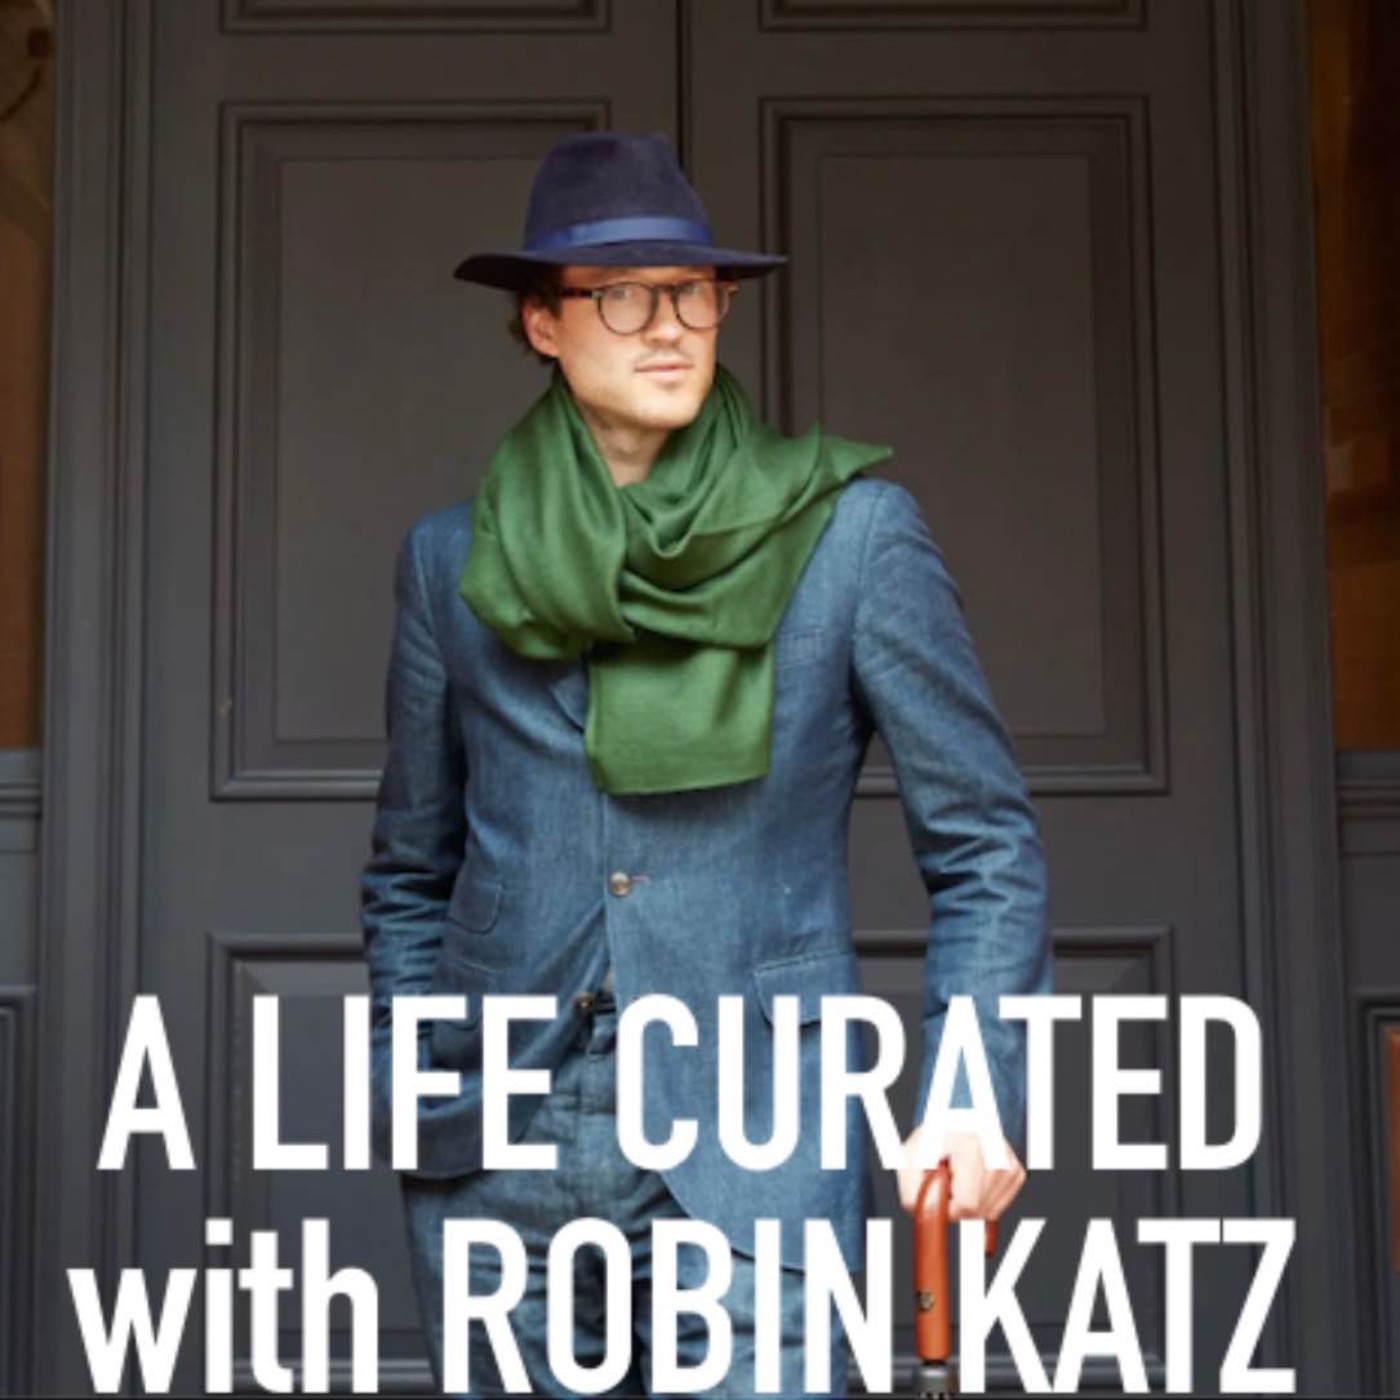 A Life Curated with Robin Katz